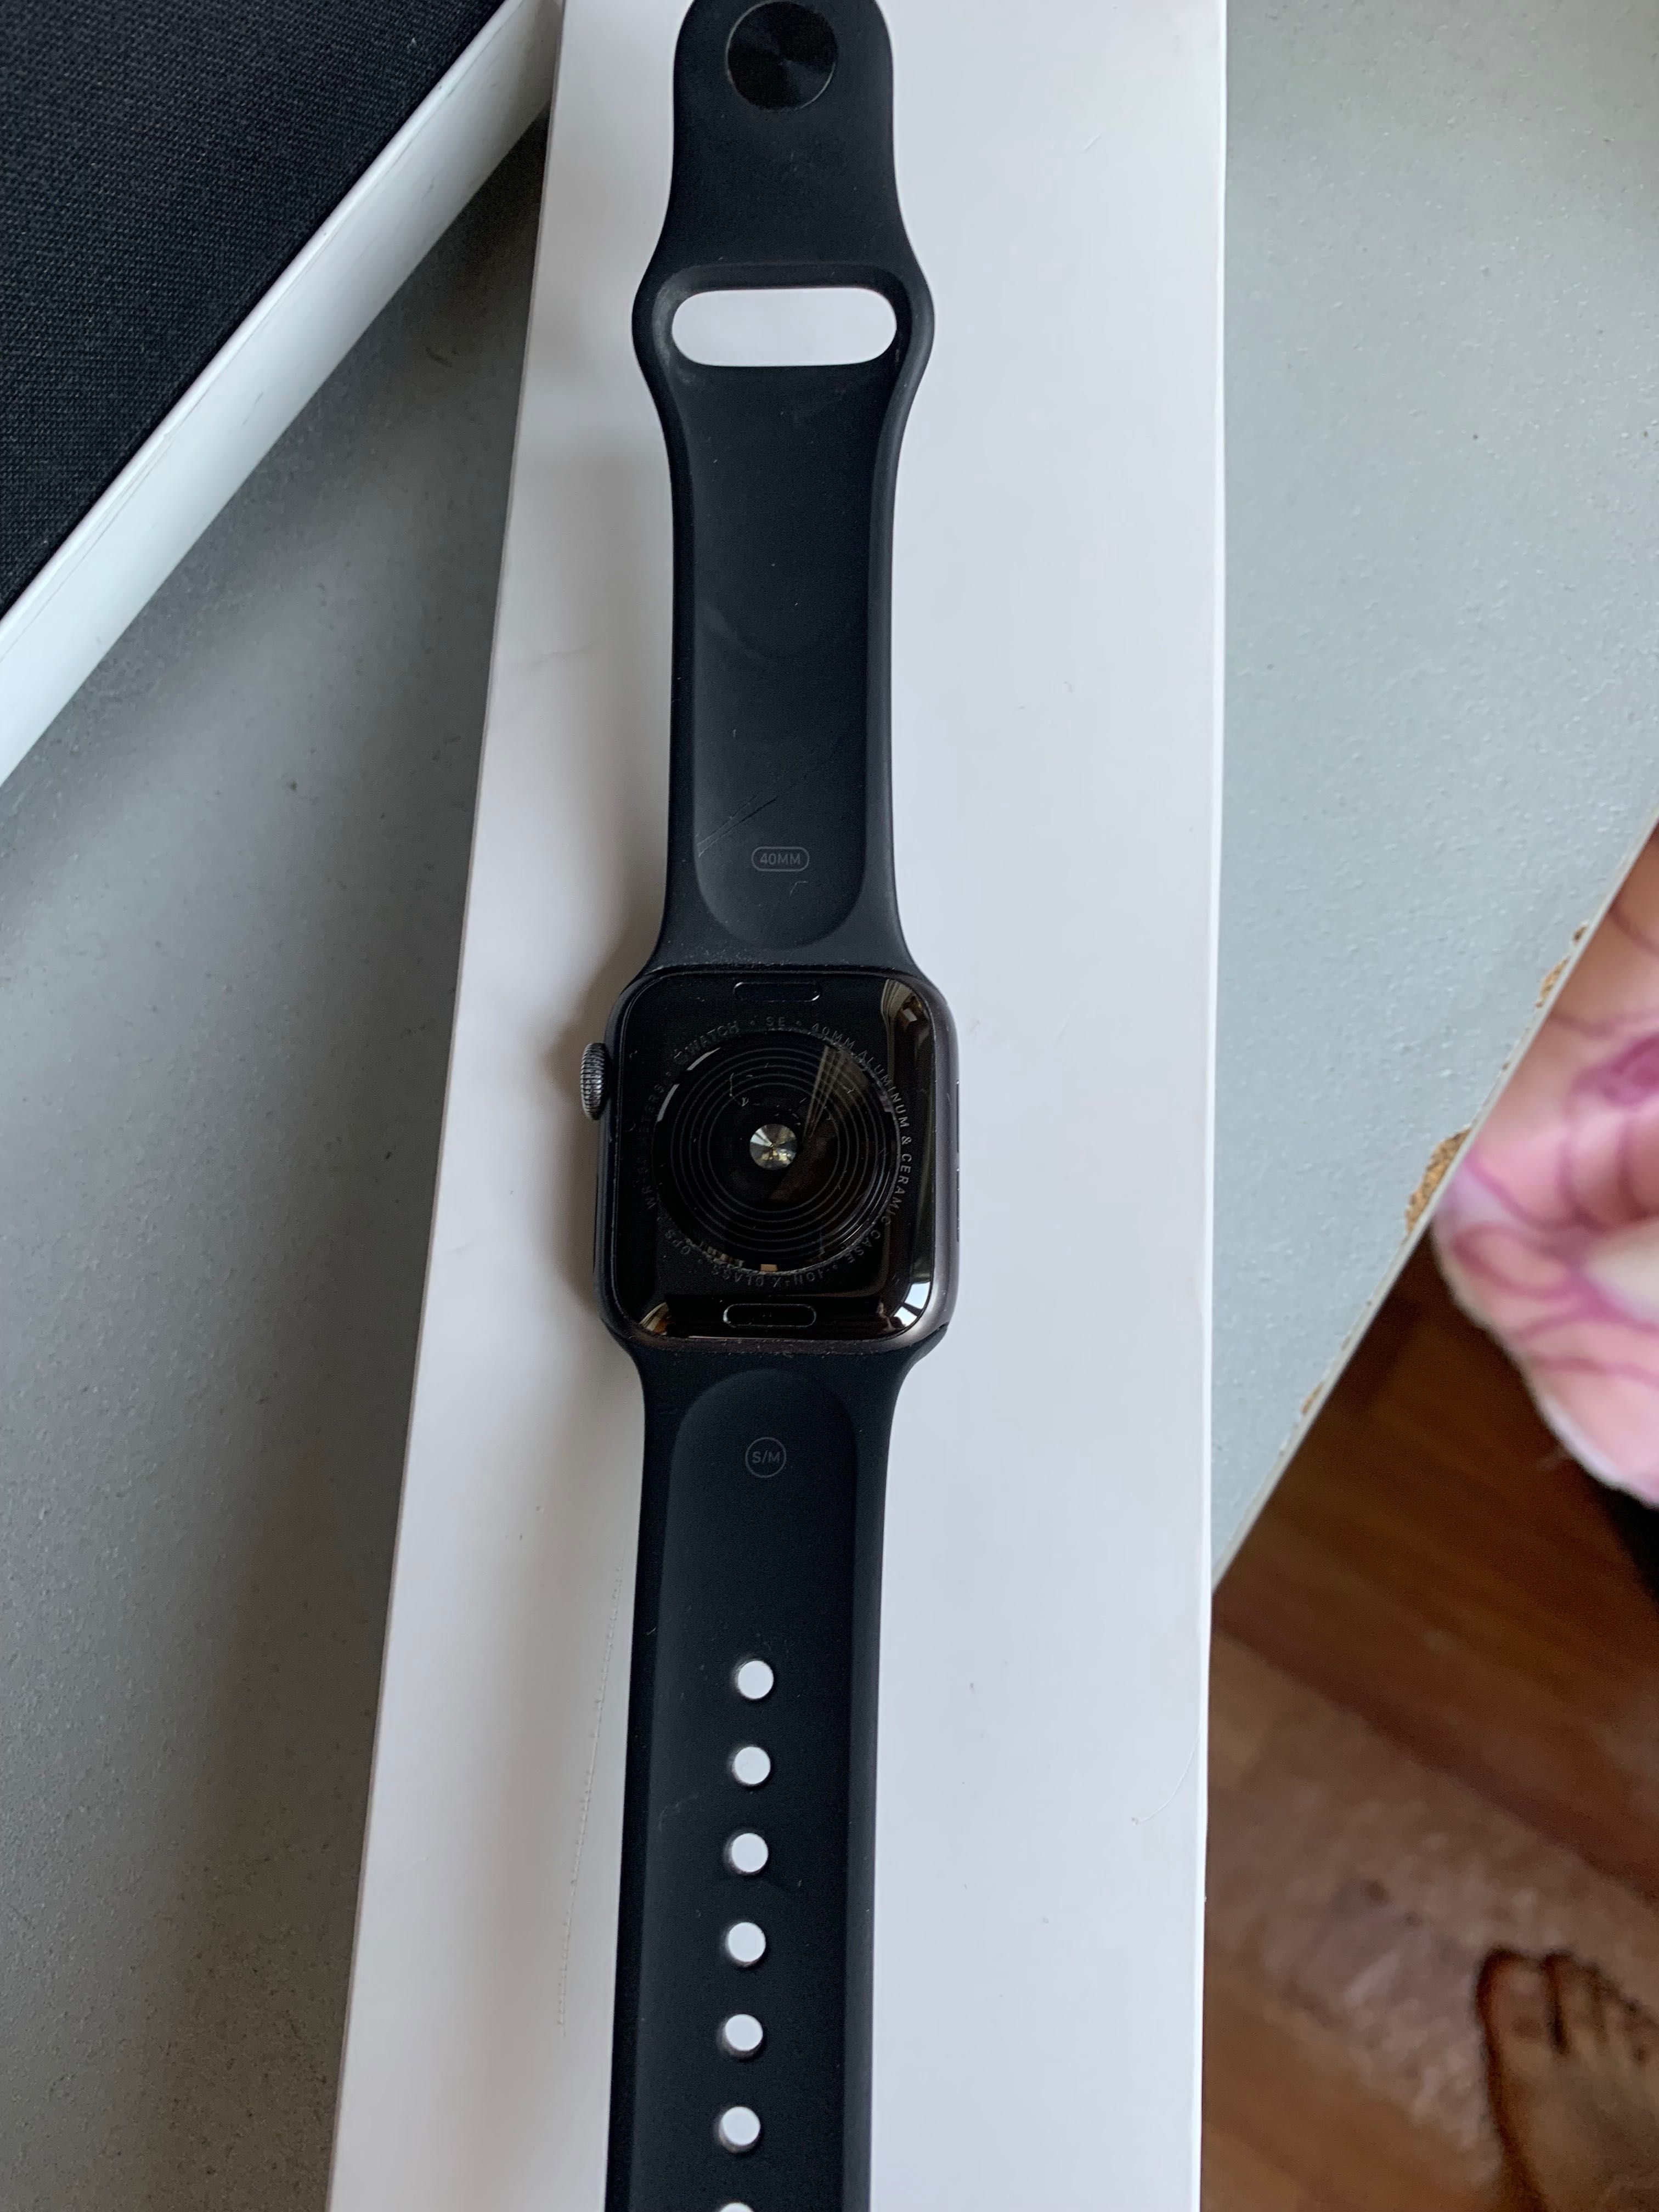 Space gray Apple Watch